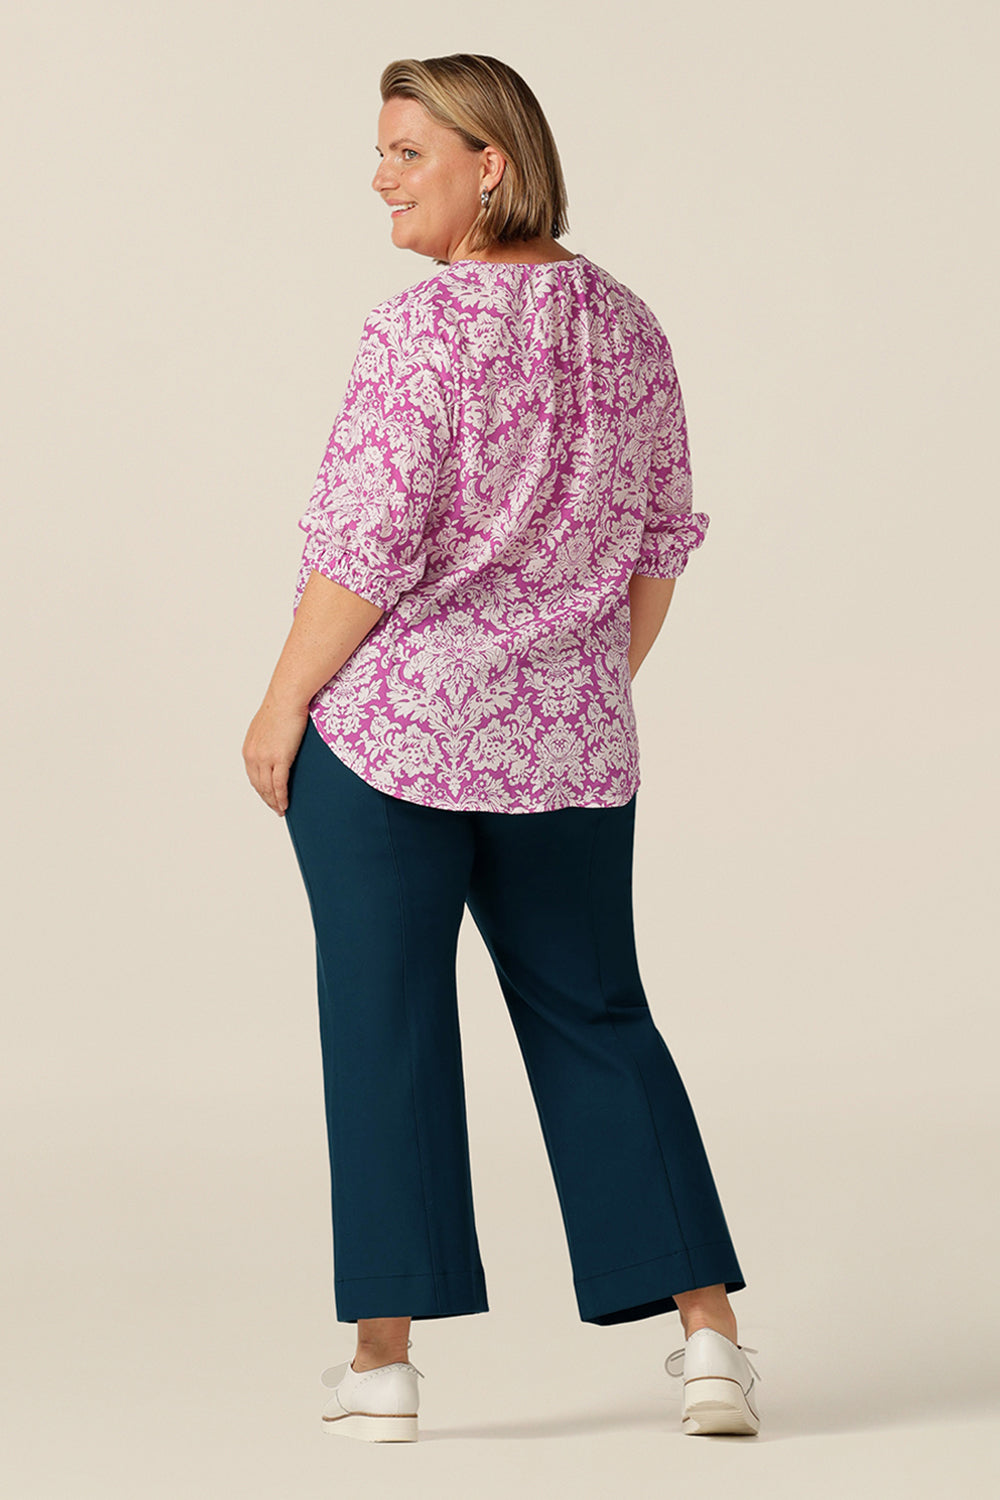 eco friendly and breathable fabric shirt with split V-neckline and 3/4 sleeves